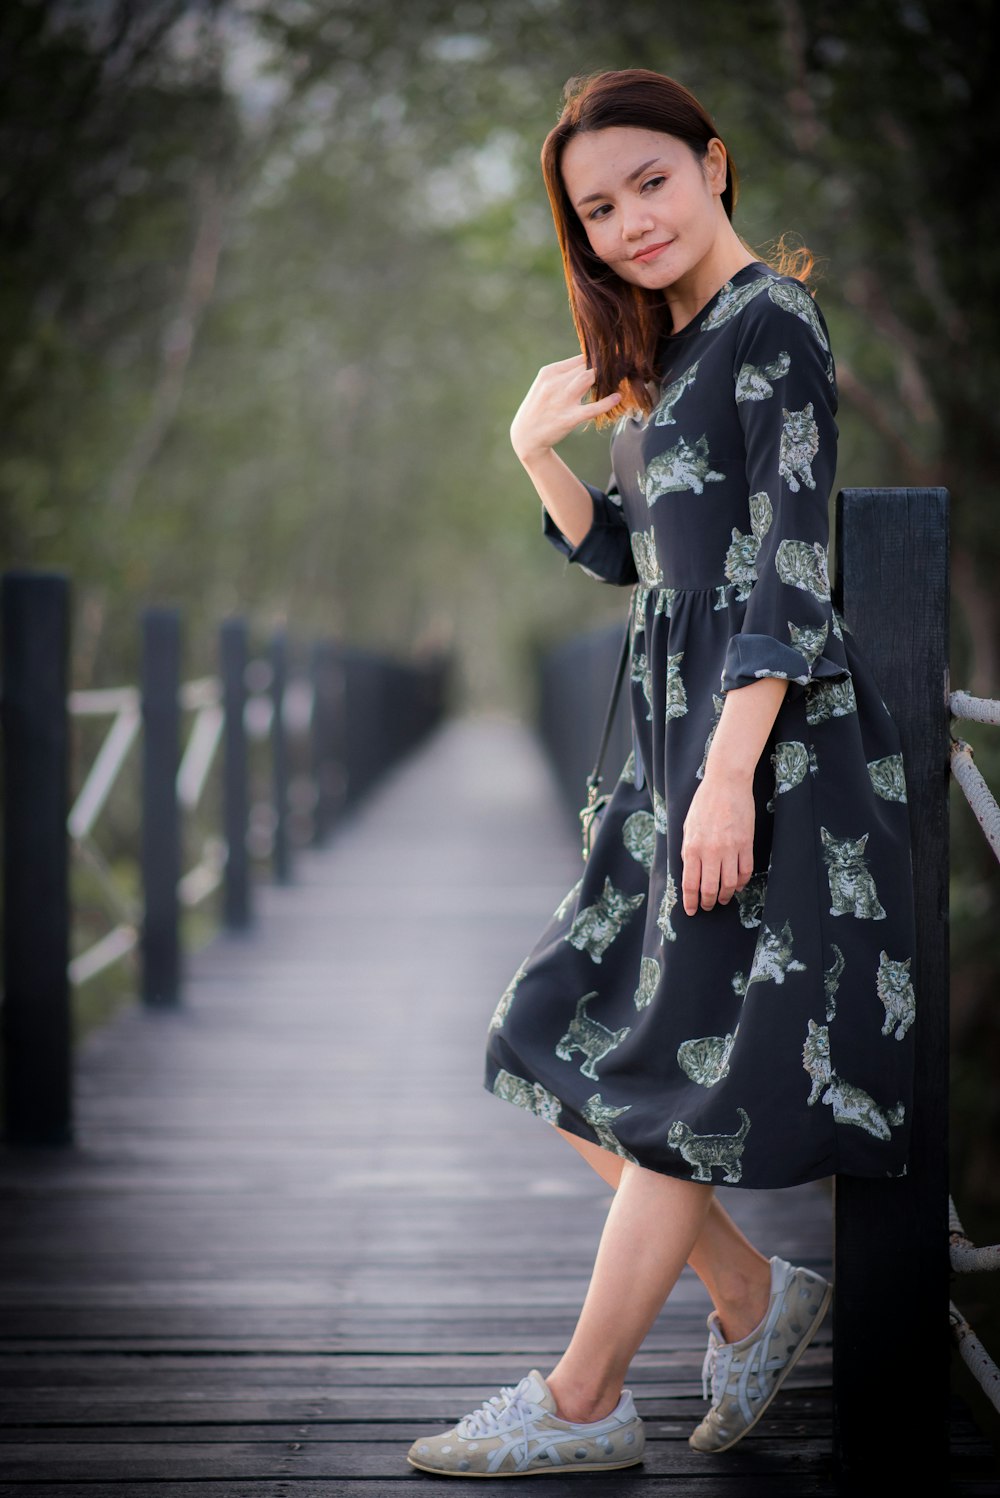 woman in black and white floral dress standing on gray concrete pathway during daytime